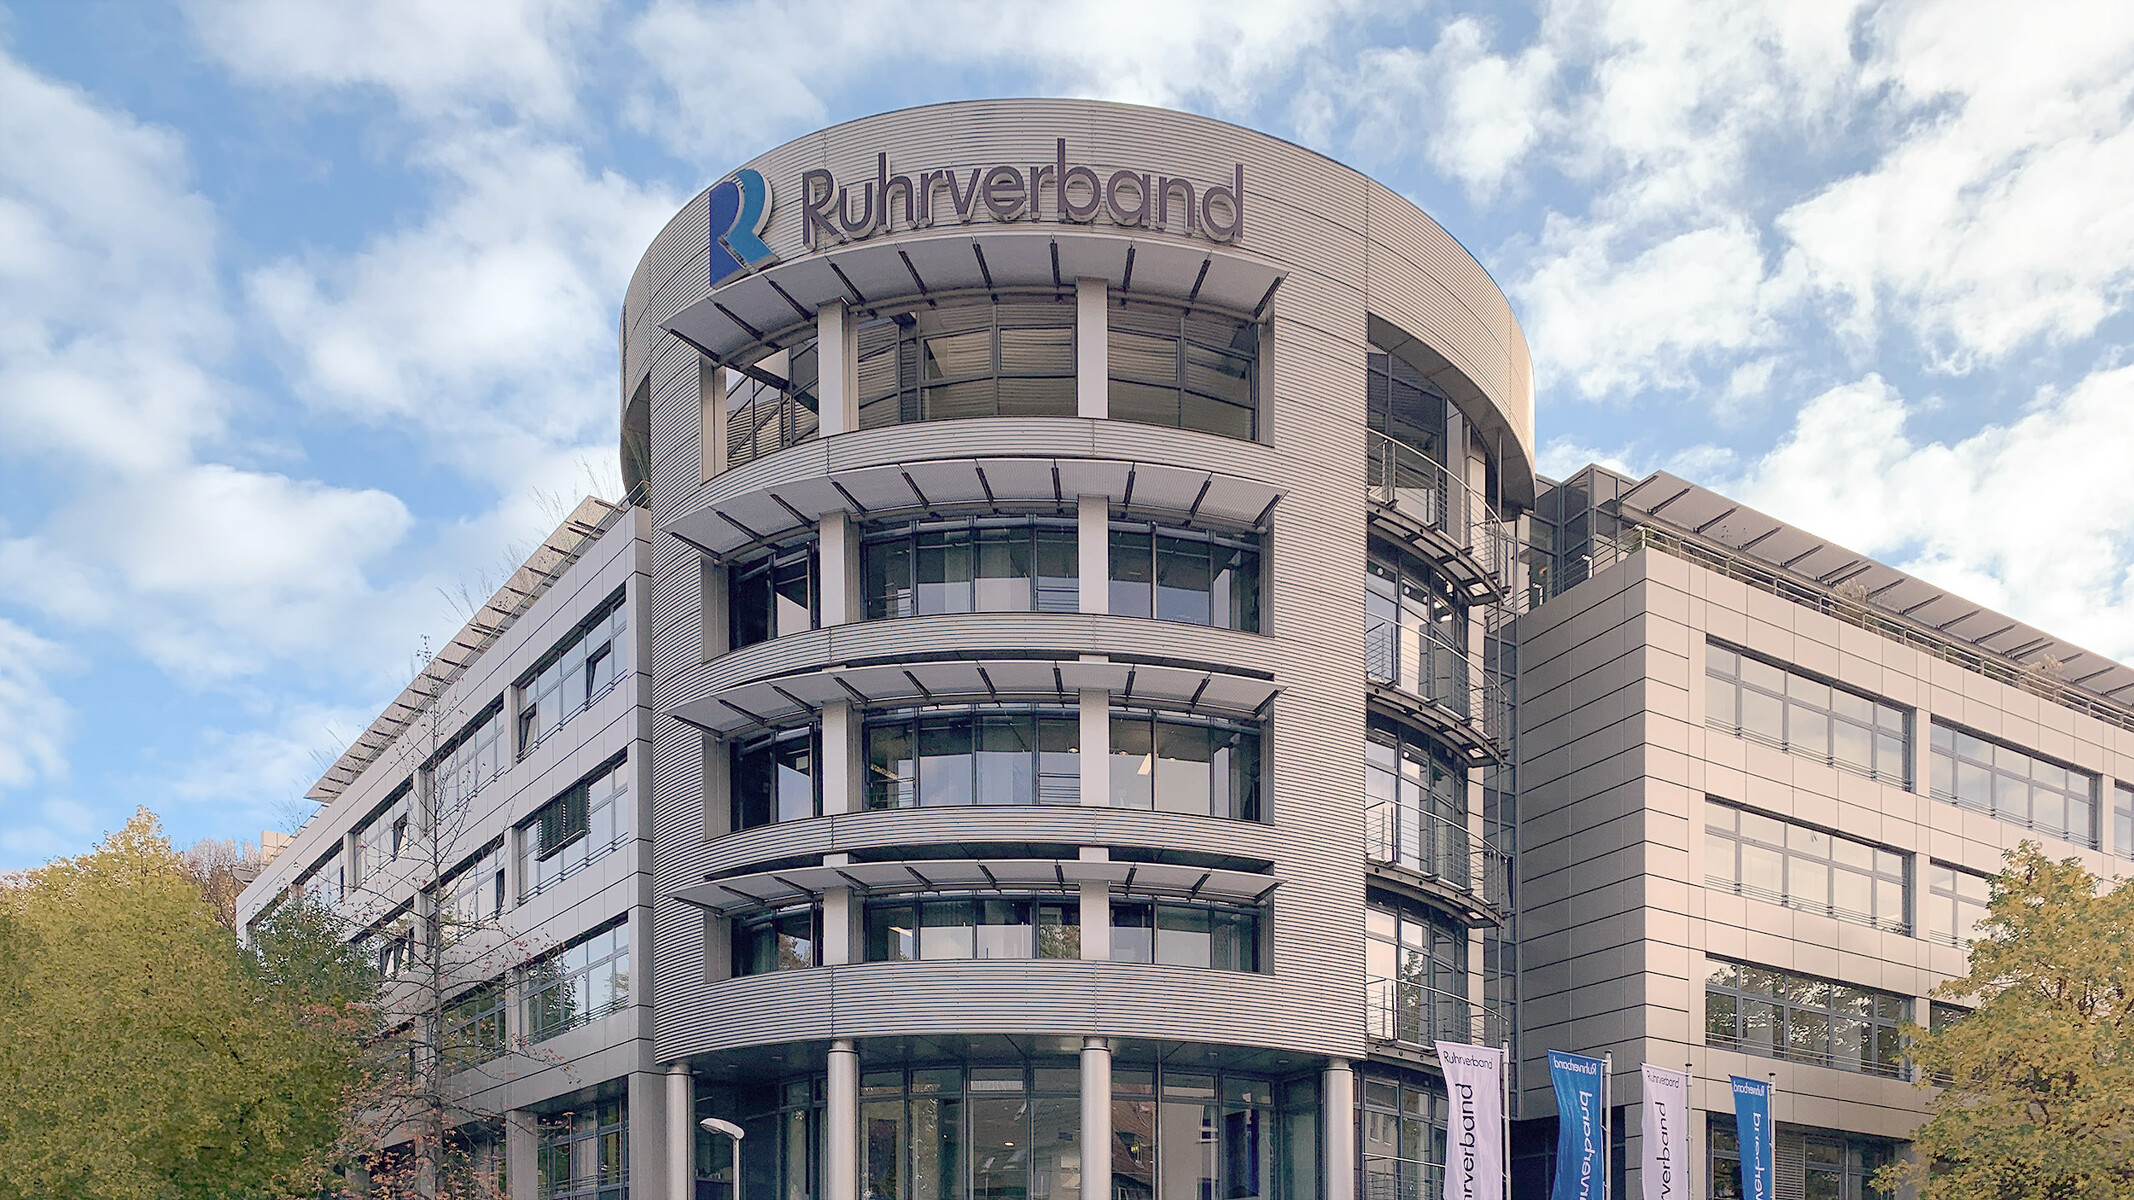 Exterior of the building of the headquarters of the Ruhrverband in Essen